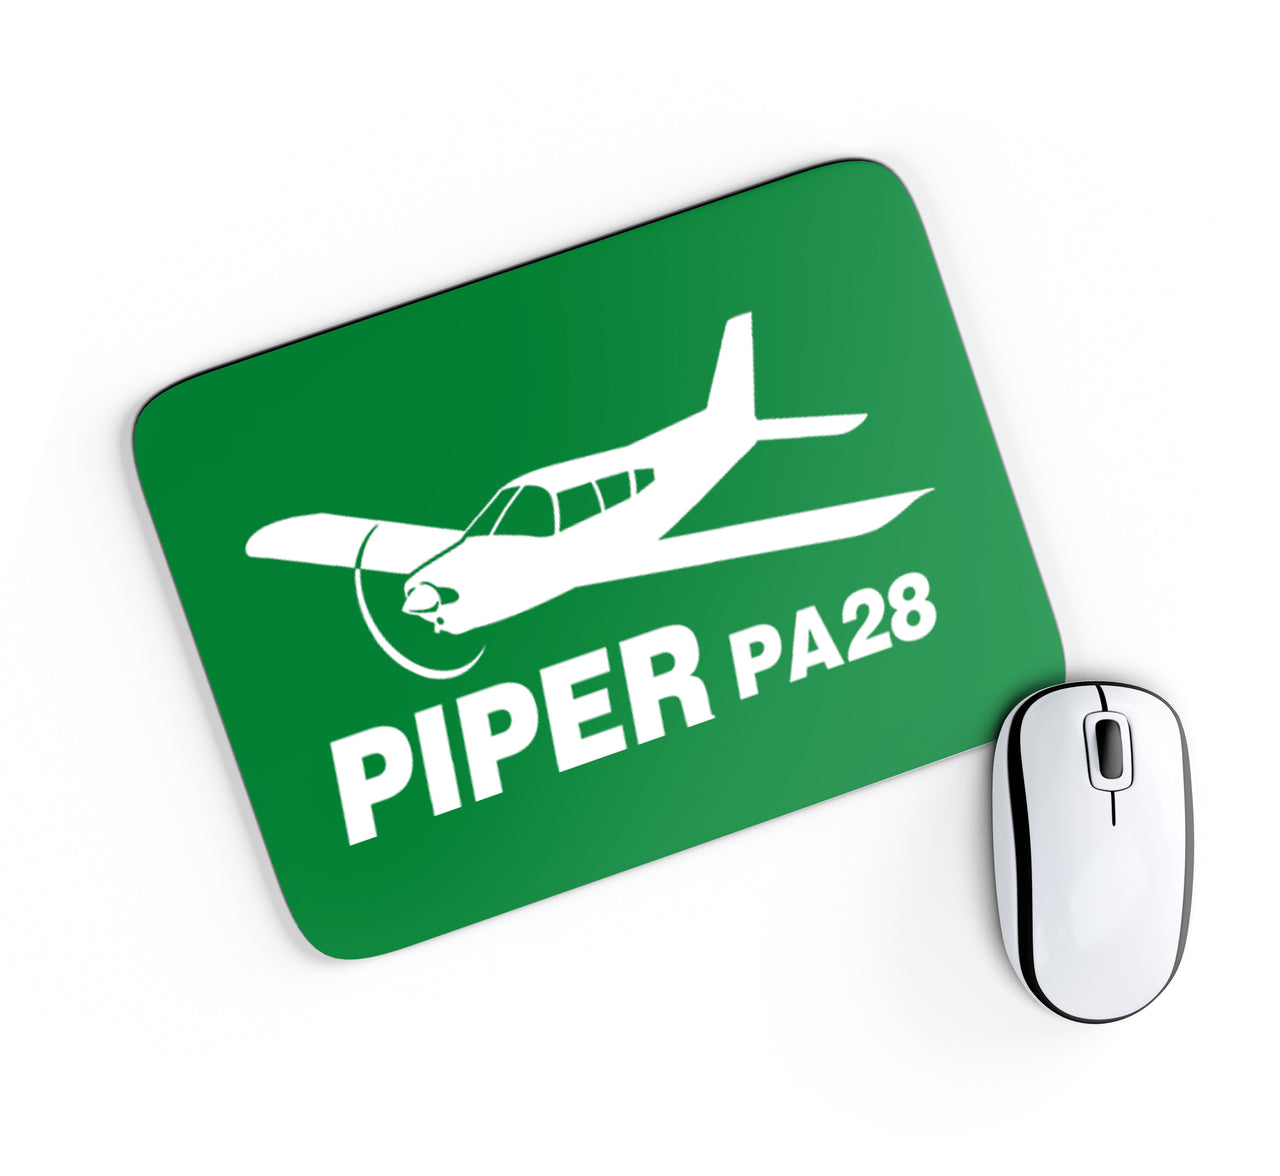 The Piper PA28 Designed Mouse Pads